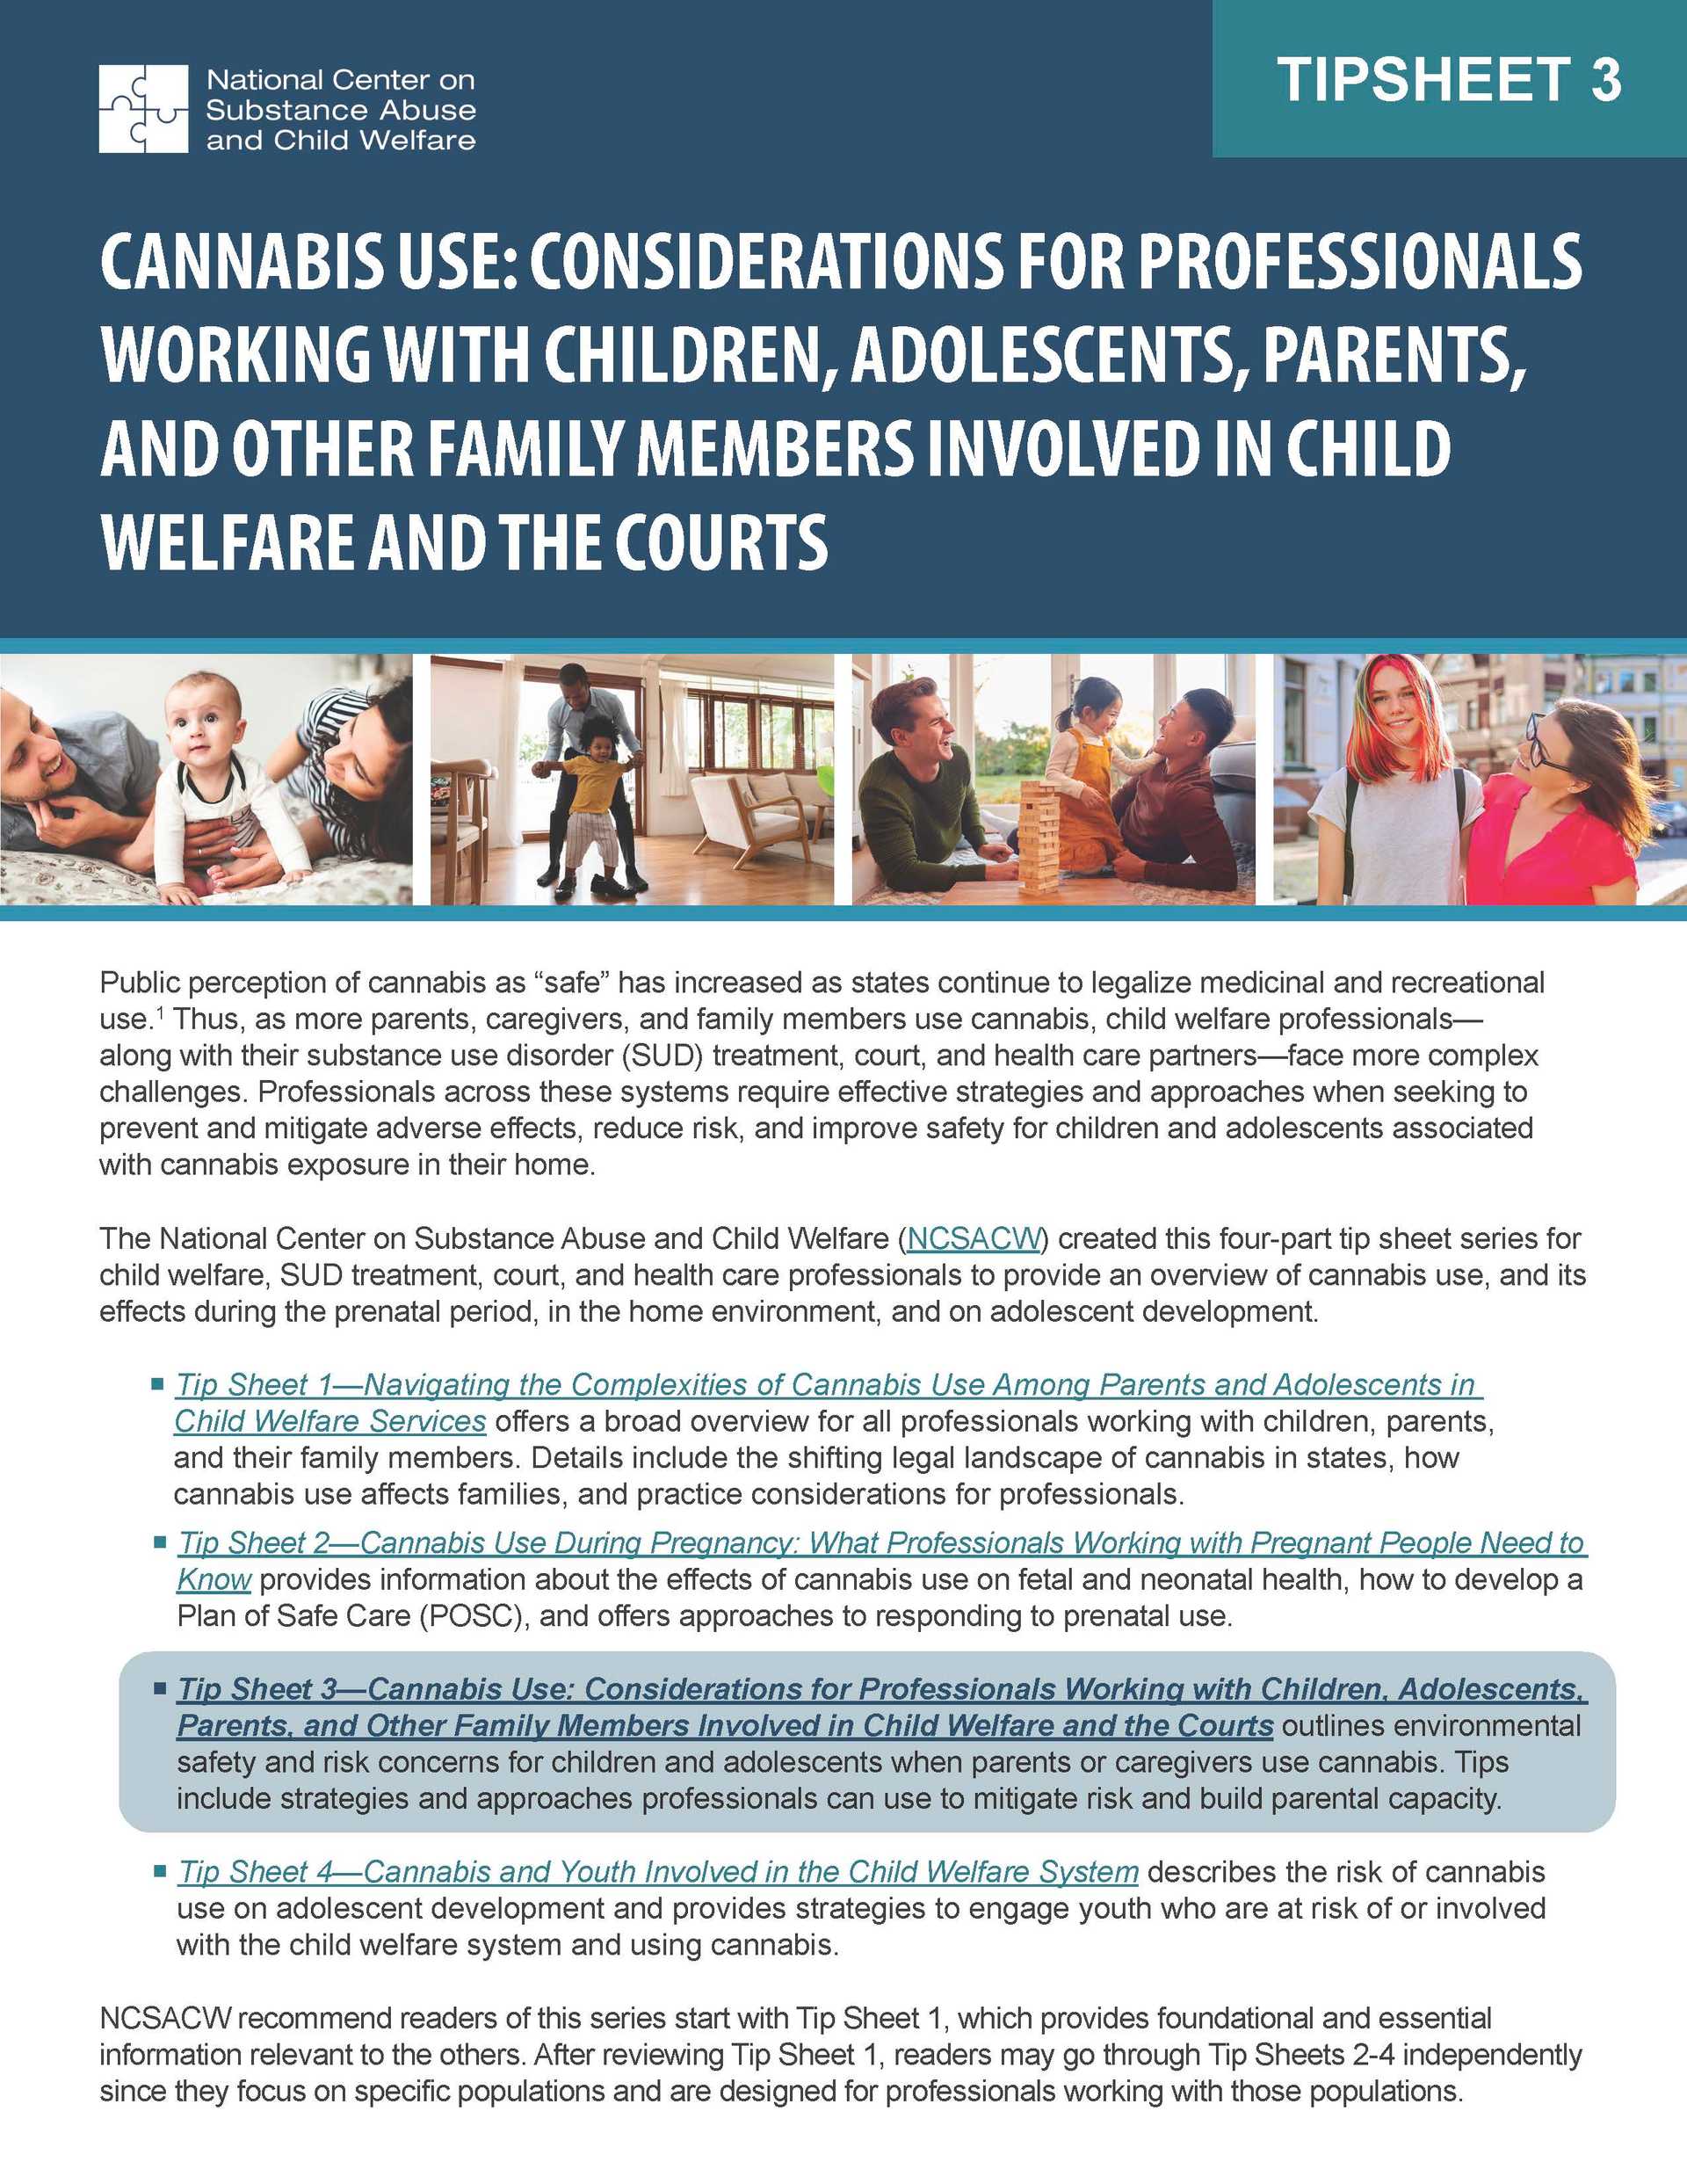 Tip Sheet 3: Cannabis Use: Considerations for Professionals Working with Children, Adolescents, Parents, and other Family Members Involved in Child Welfare and the Courts